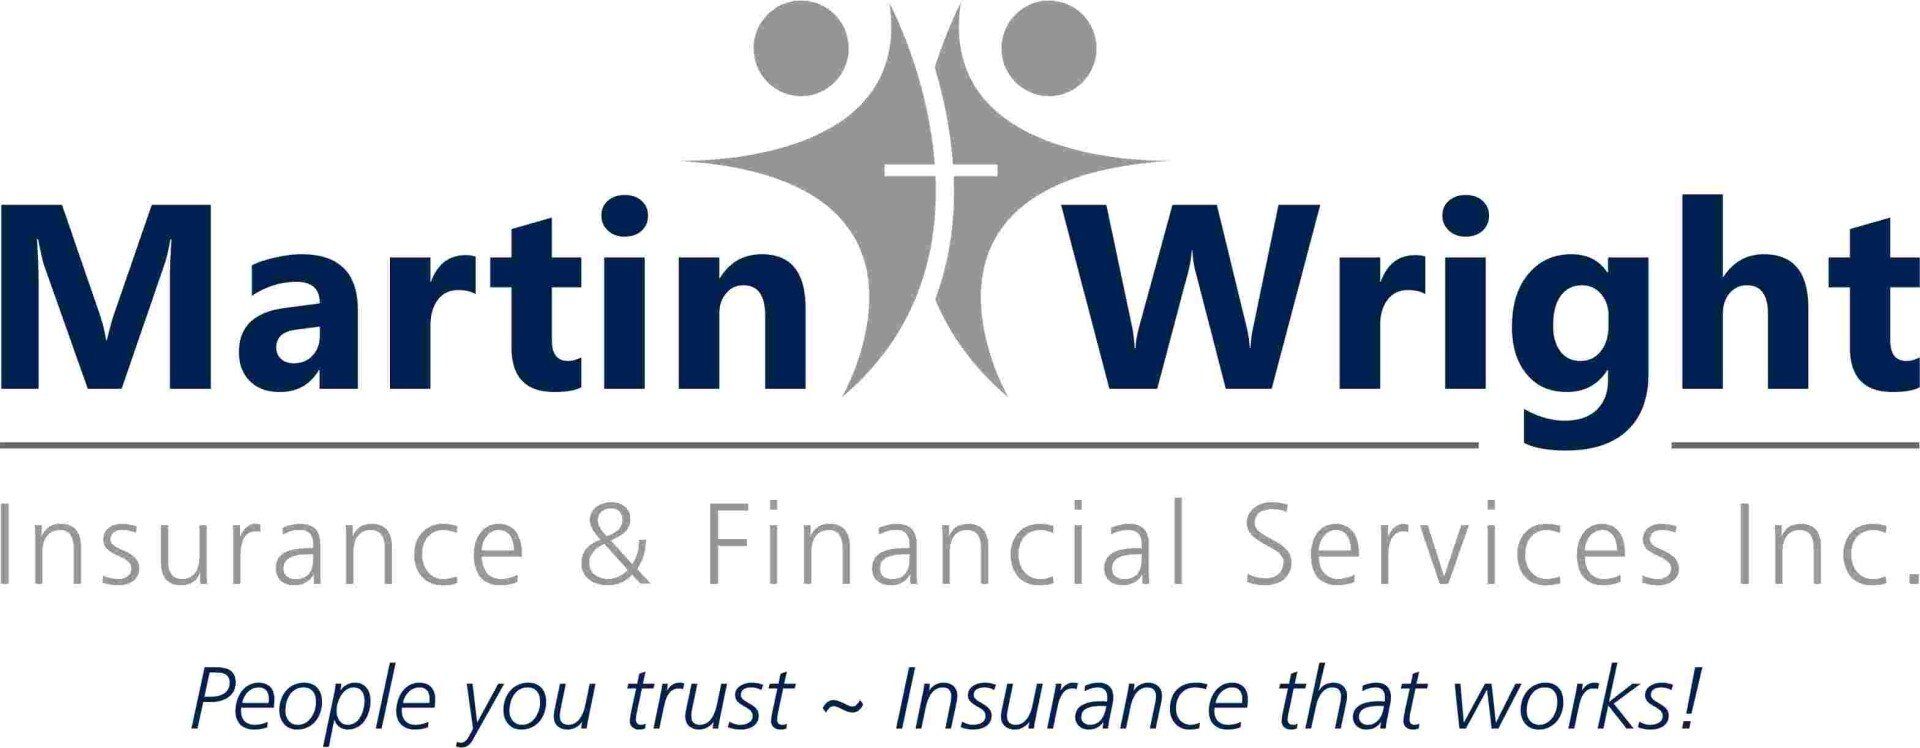 LOGO martin wright insurance and financial services inc.